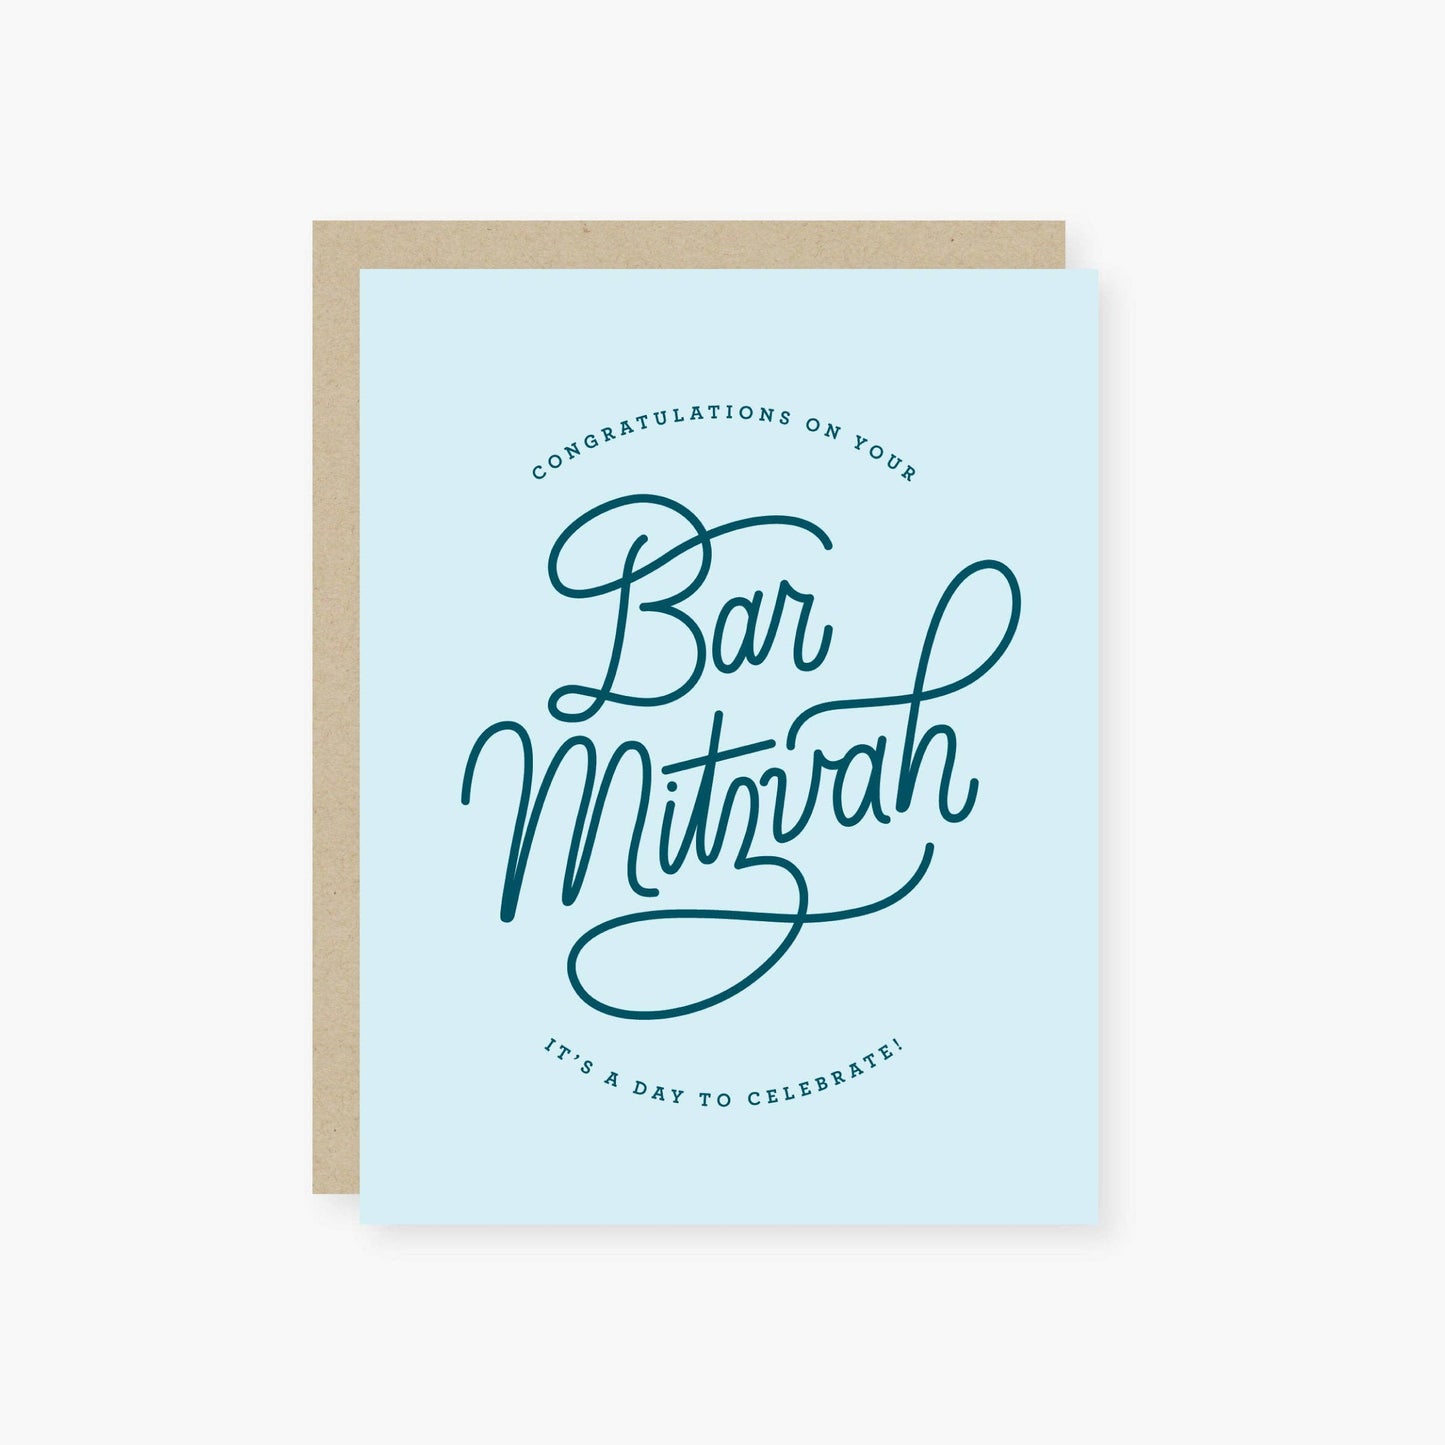 Congratulations on Your Bar Mitzvah Card (Blue) By 2021 Co.